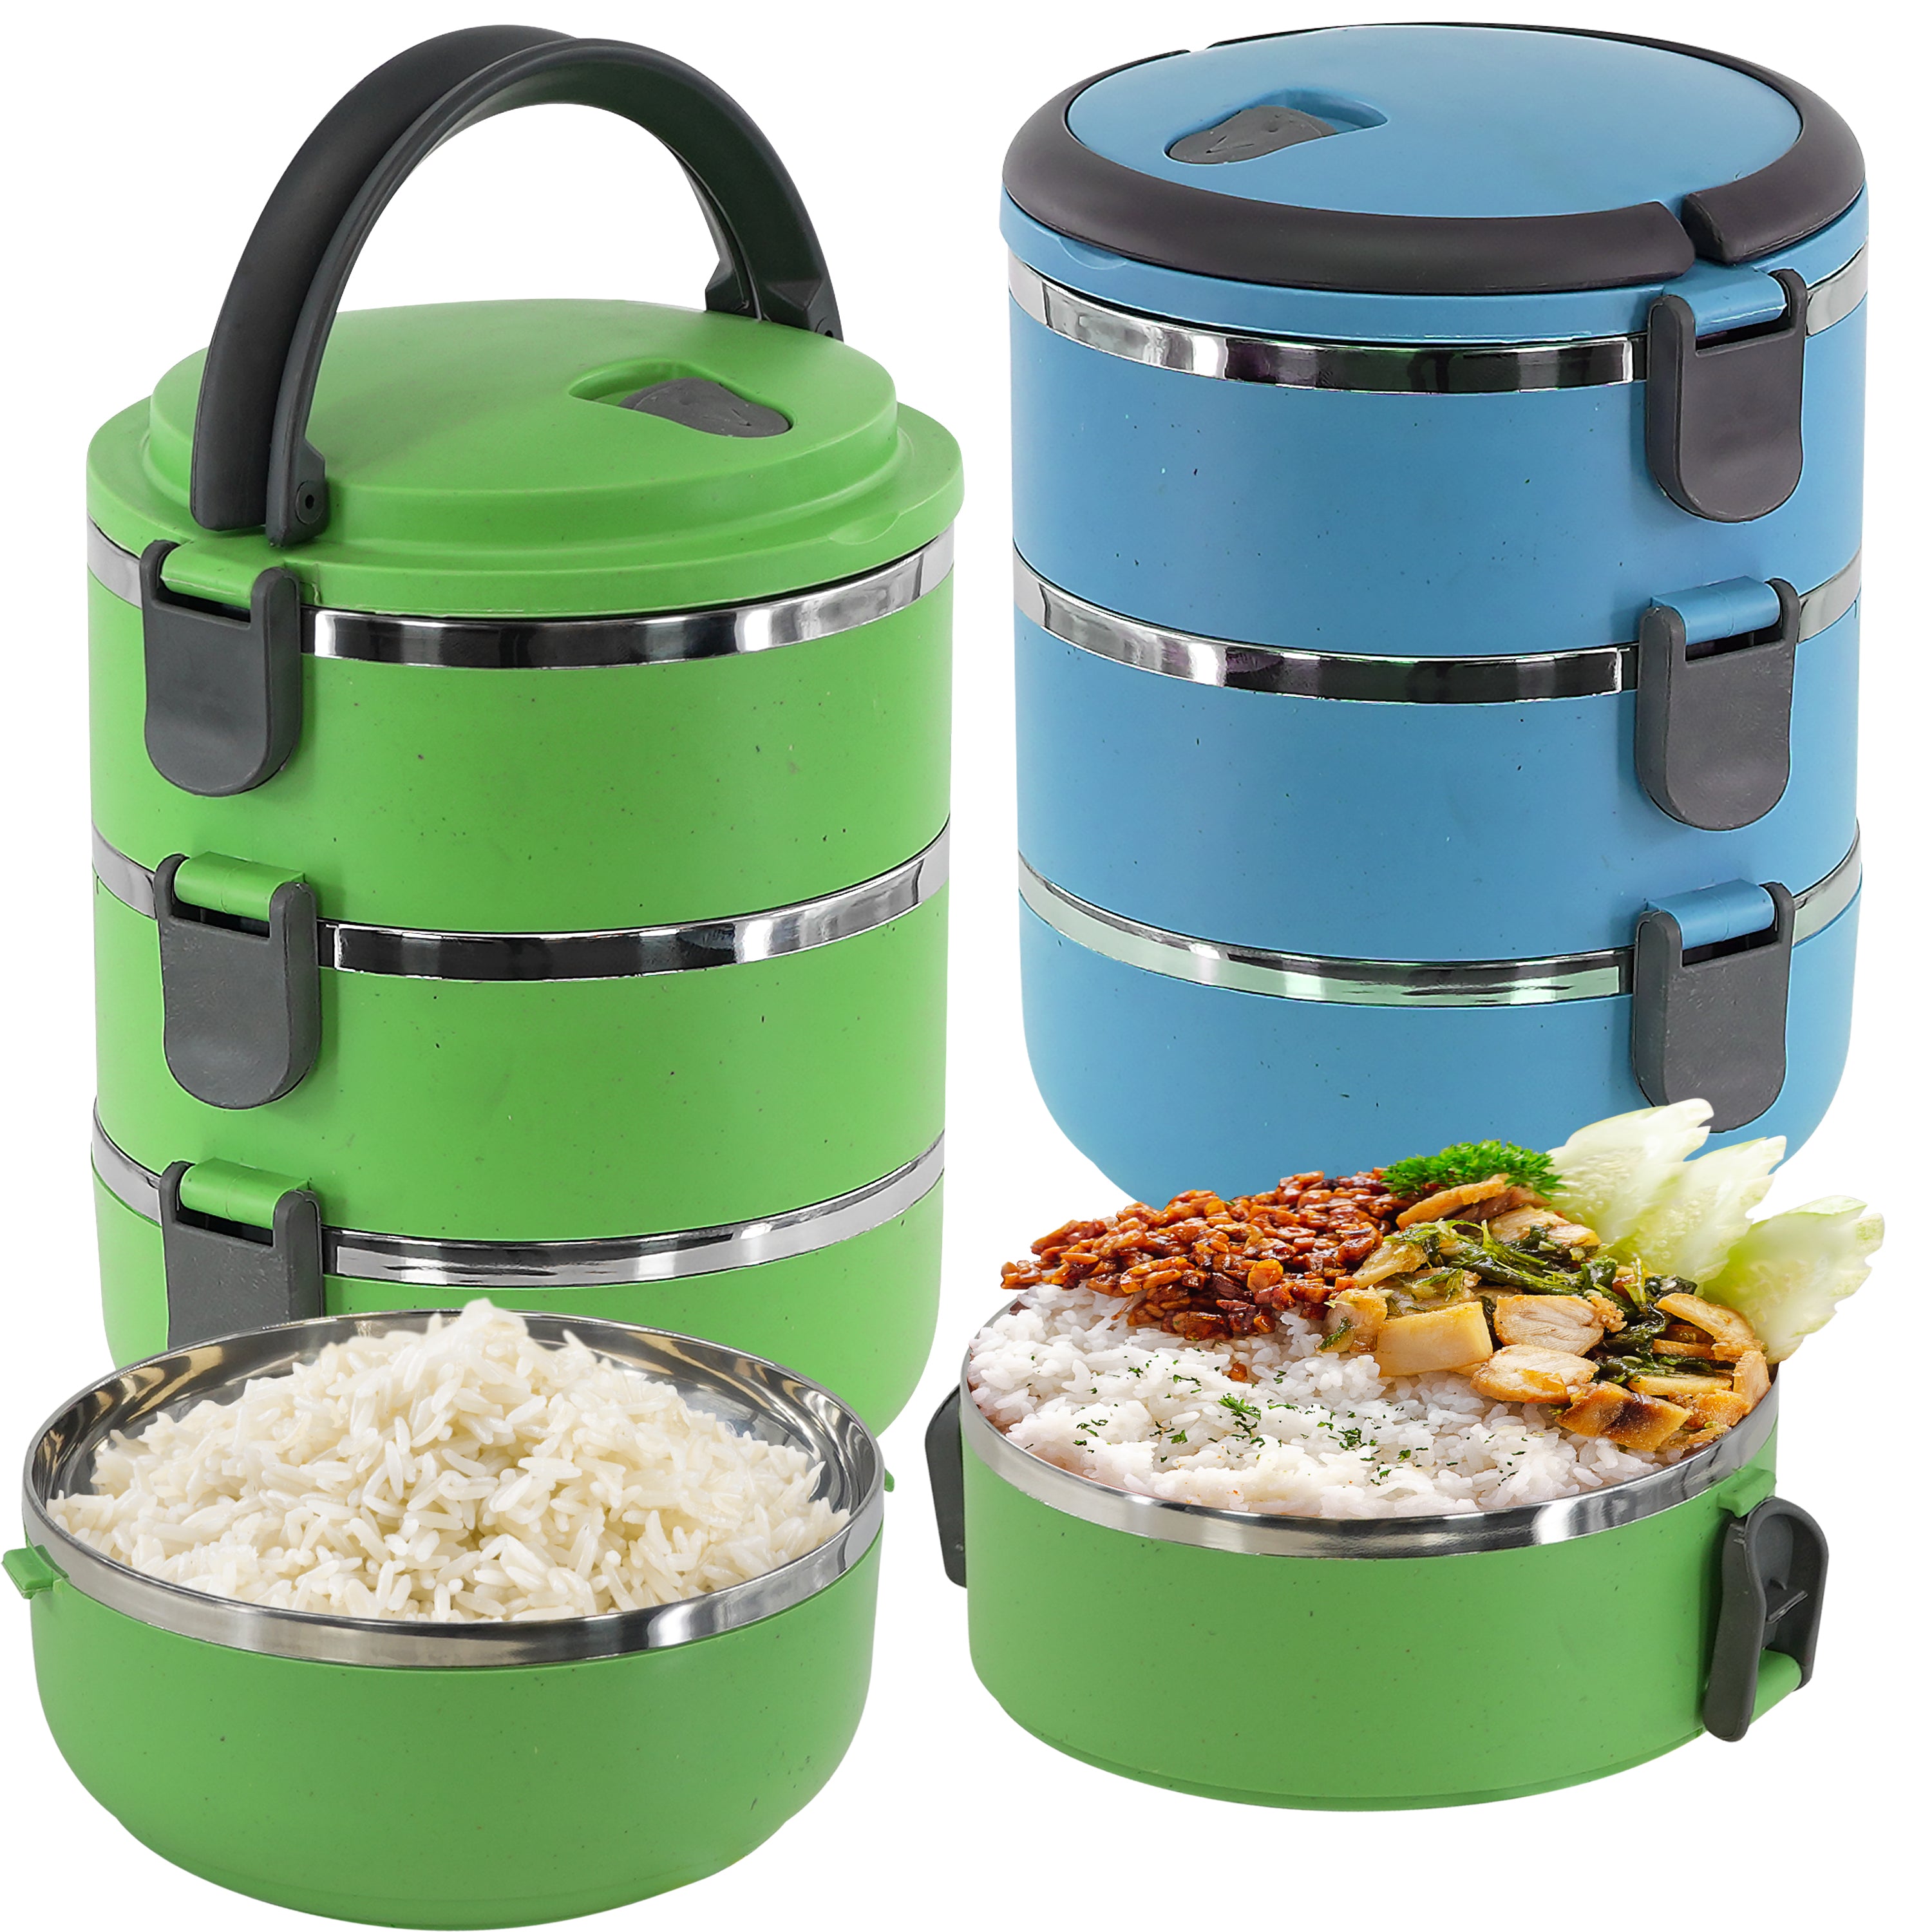 Lunch Box Stackable Lunch 2 Layer Tier Bento Bpa Free Food